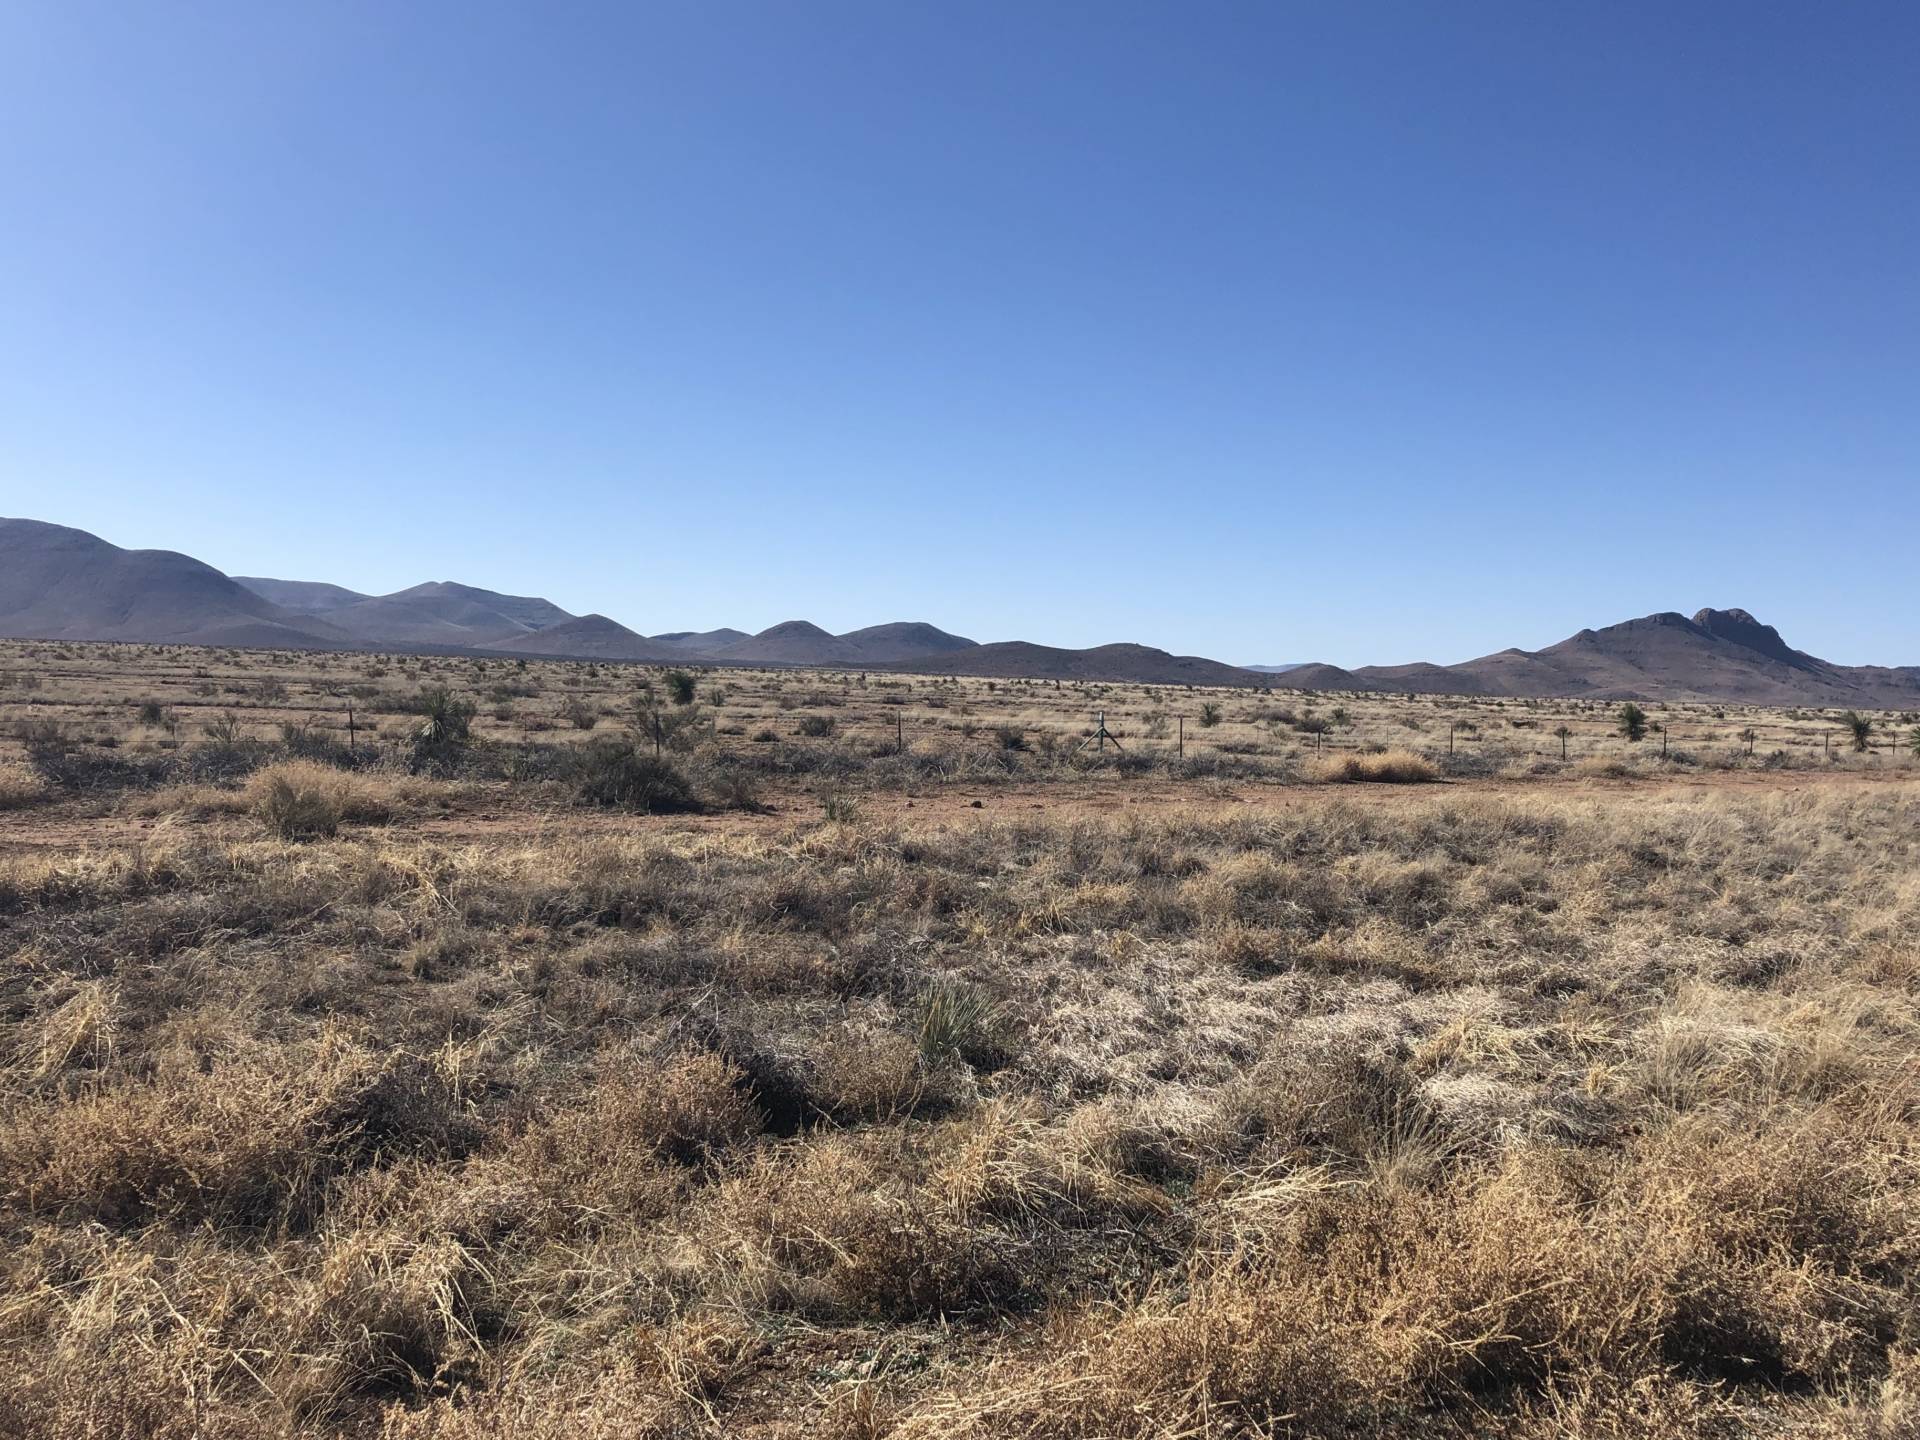 New Mexico's Bootheel region along the U.S.-Mexico border is an important wildlife corridor. There is currently no border wall in this area but environmentalists are concerned about what could happen if the wall is expanded. Mallory Falk/KRWG